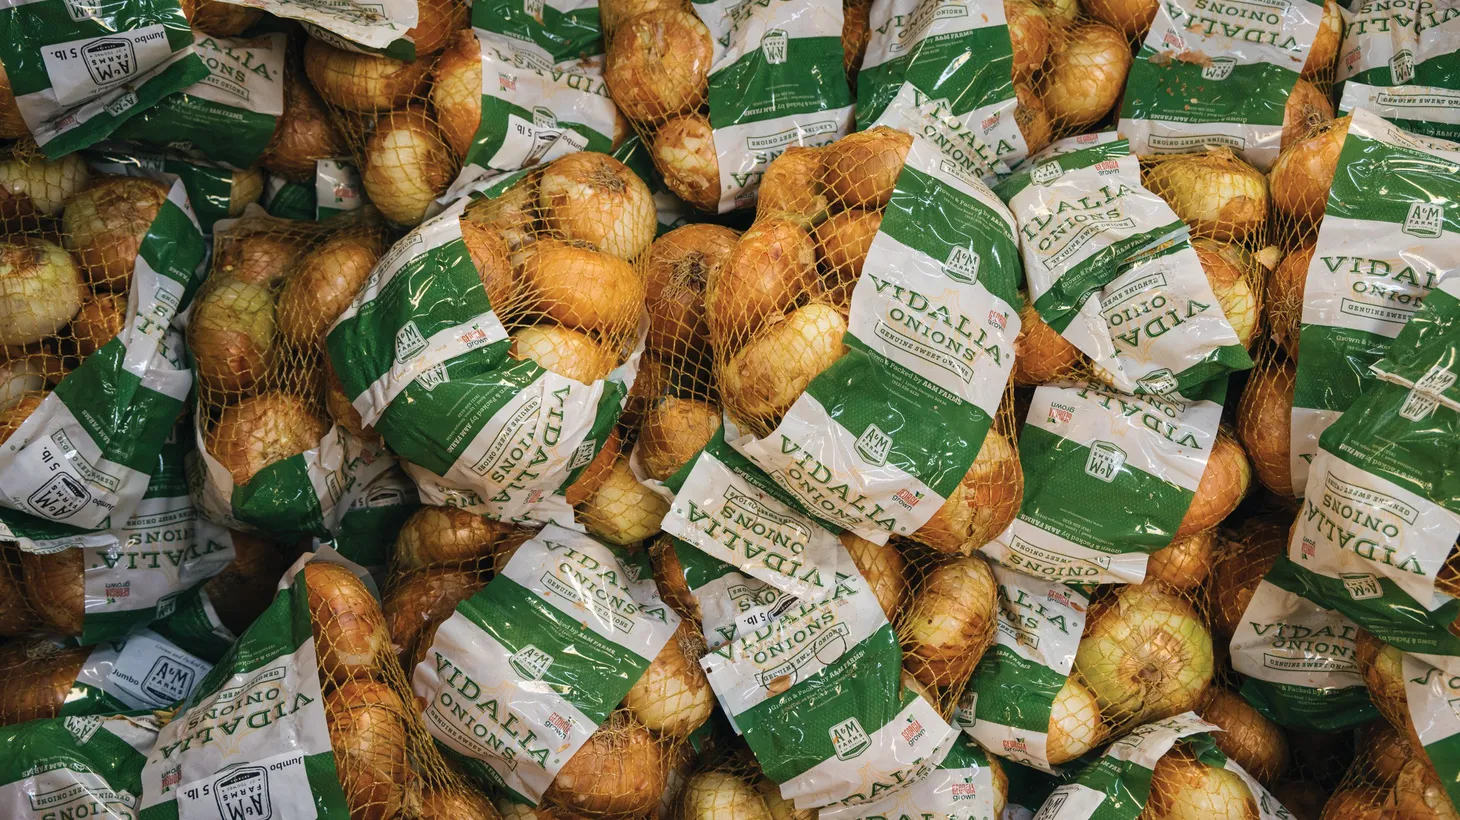 With their mild sweetness, Vidalia onions have a backstory riddled with exploitation and hard labor.